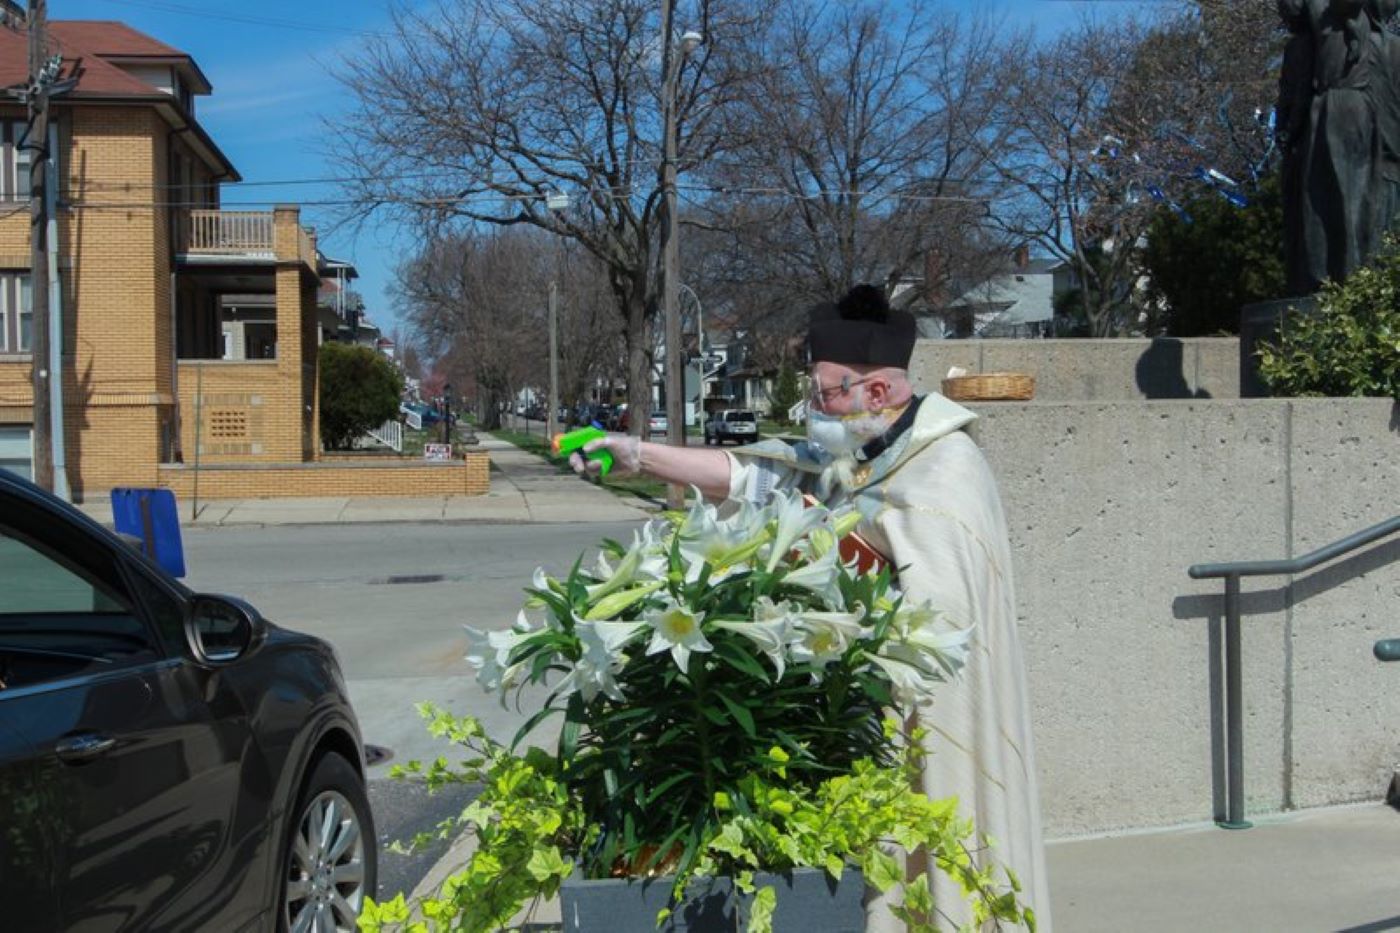 Father Pelc squirts holy water towards a car (Natalie White/AP)